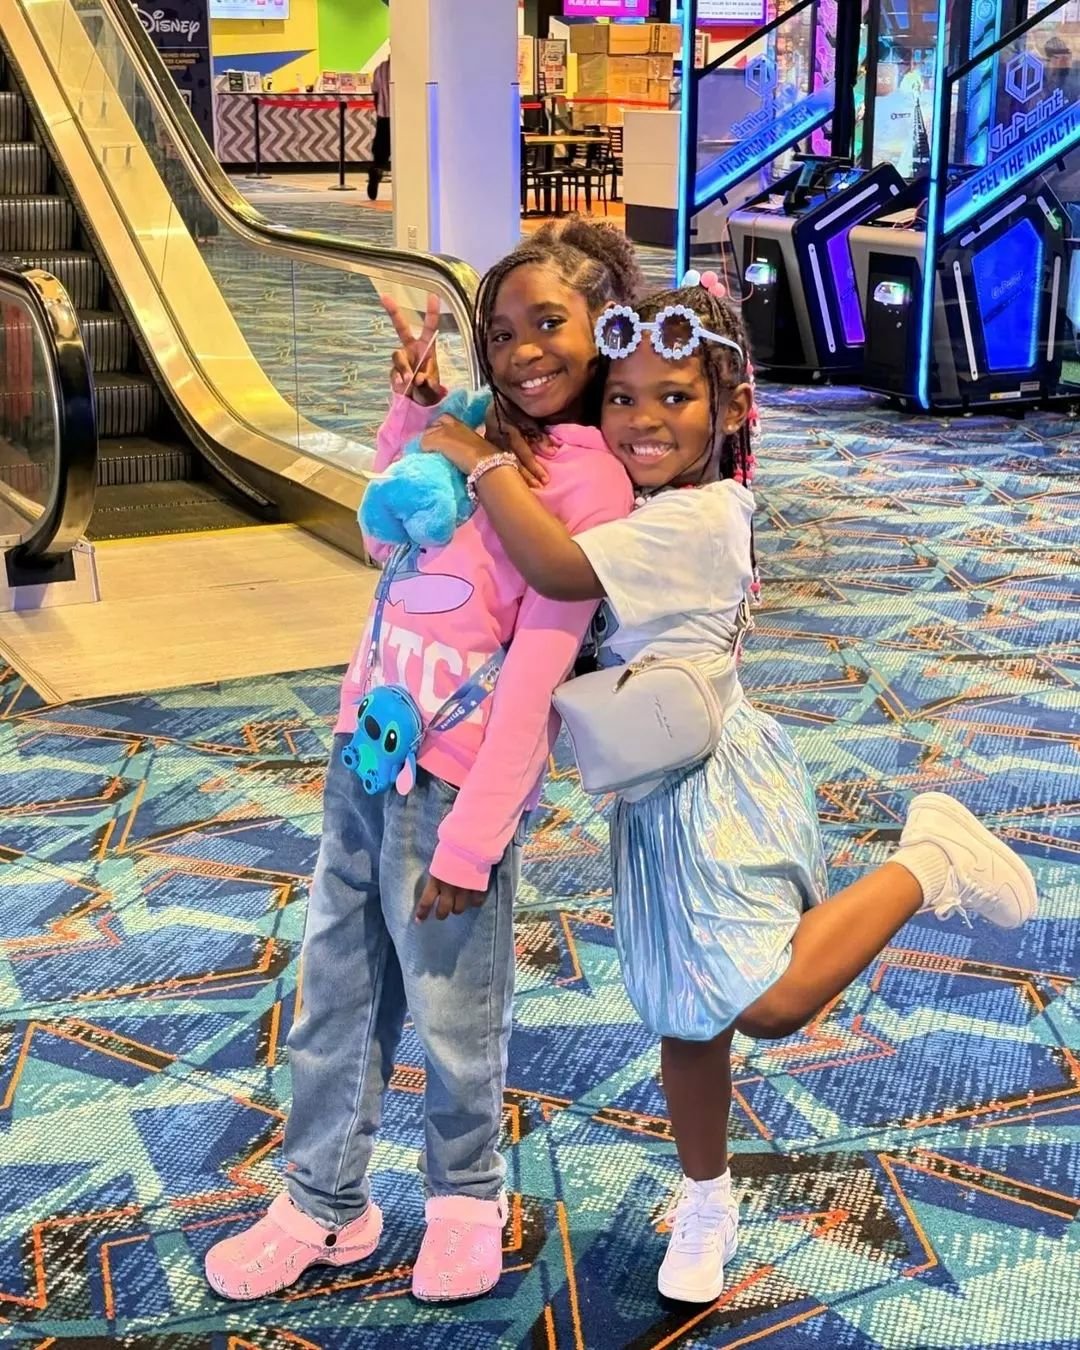 Create fun birthday memories with your loved ones! Celebrate all the fun under one roof! 🙌🎊❣️

&quot;Yesterday fun🥳🩵 celebrating my cousin birthday at @round1usa 🥳💃🏽🥳 we had a blast the stitch theme was so cute🥹🥰&quot;
---
📸📽️ : @__lifeof